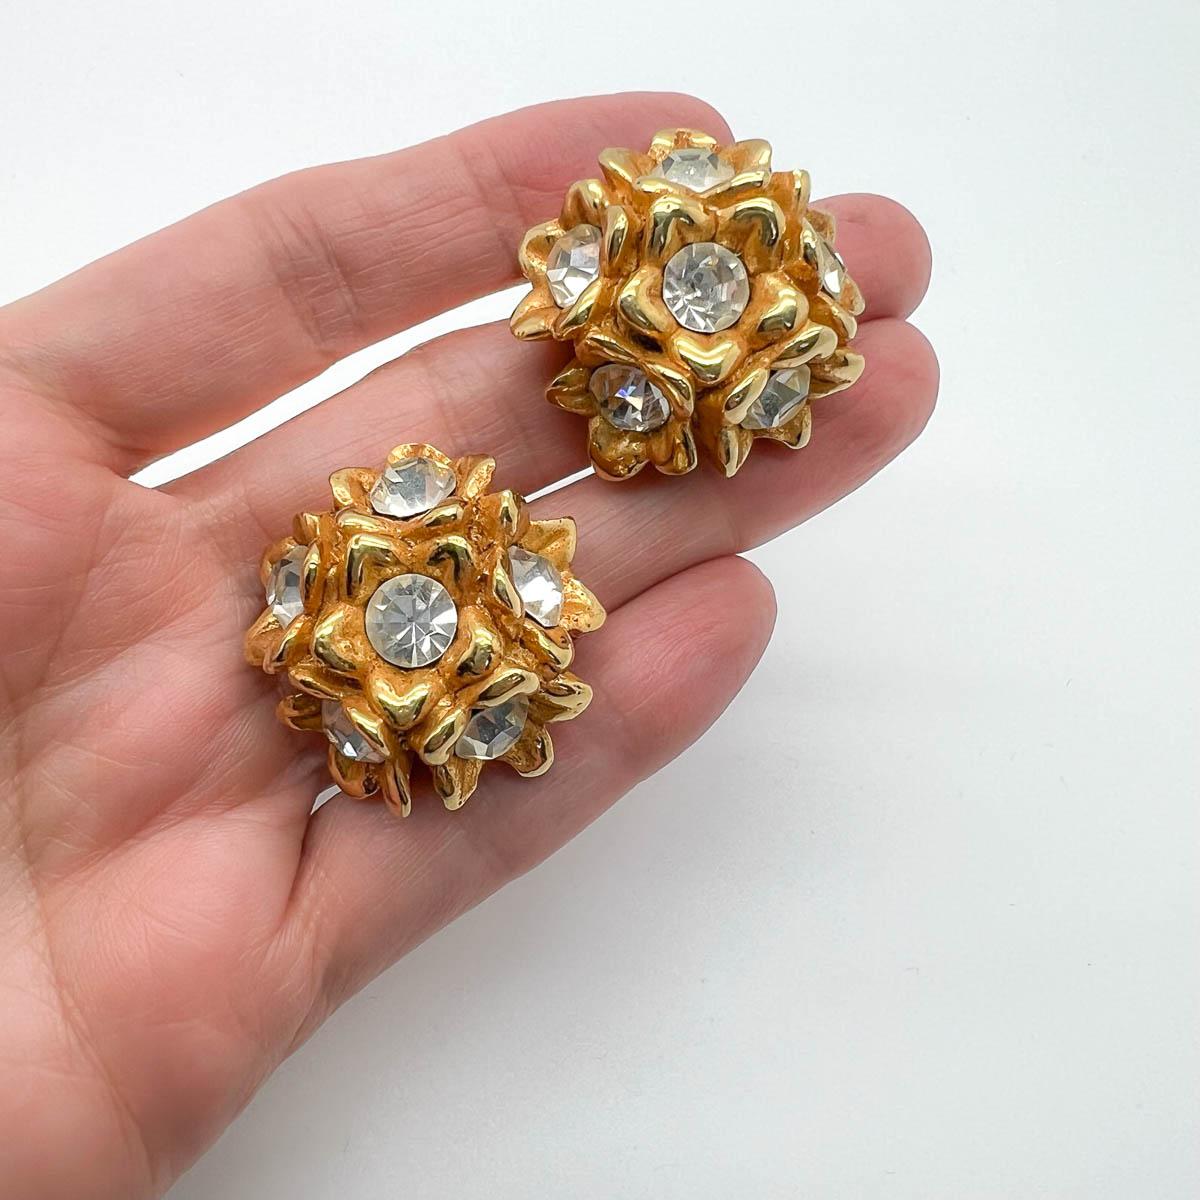 Vintage Alexis Lahellec Paris Earrings. Parisian designer Alexis Lahellec crafted wondrous costume jewellery during the latter part of the 20th Century. His creations range from classics with a fabulous twist to hugely exotic designs of wearable